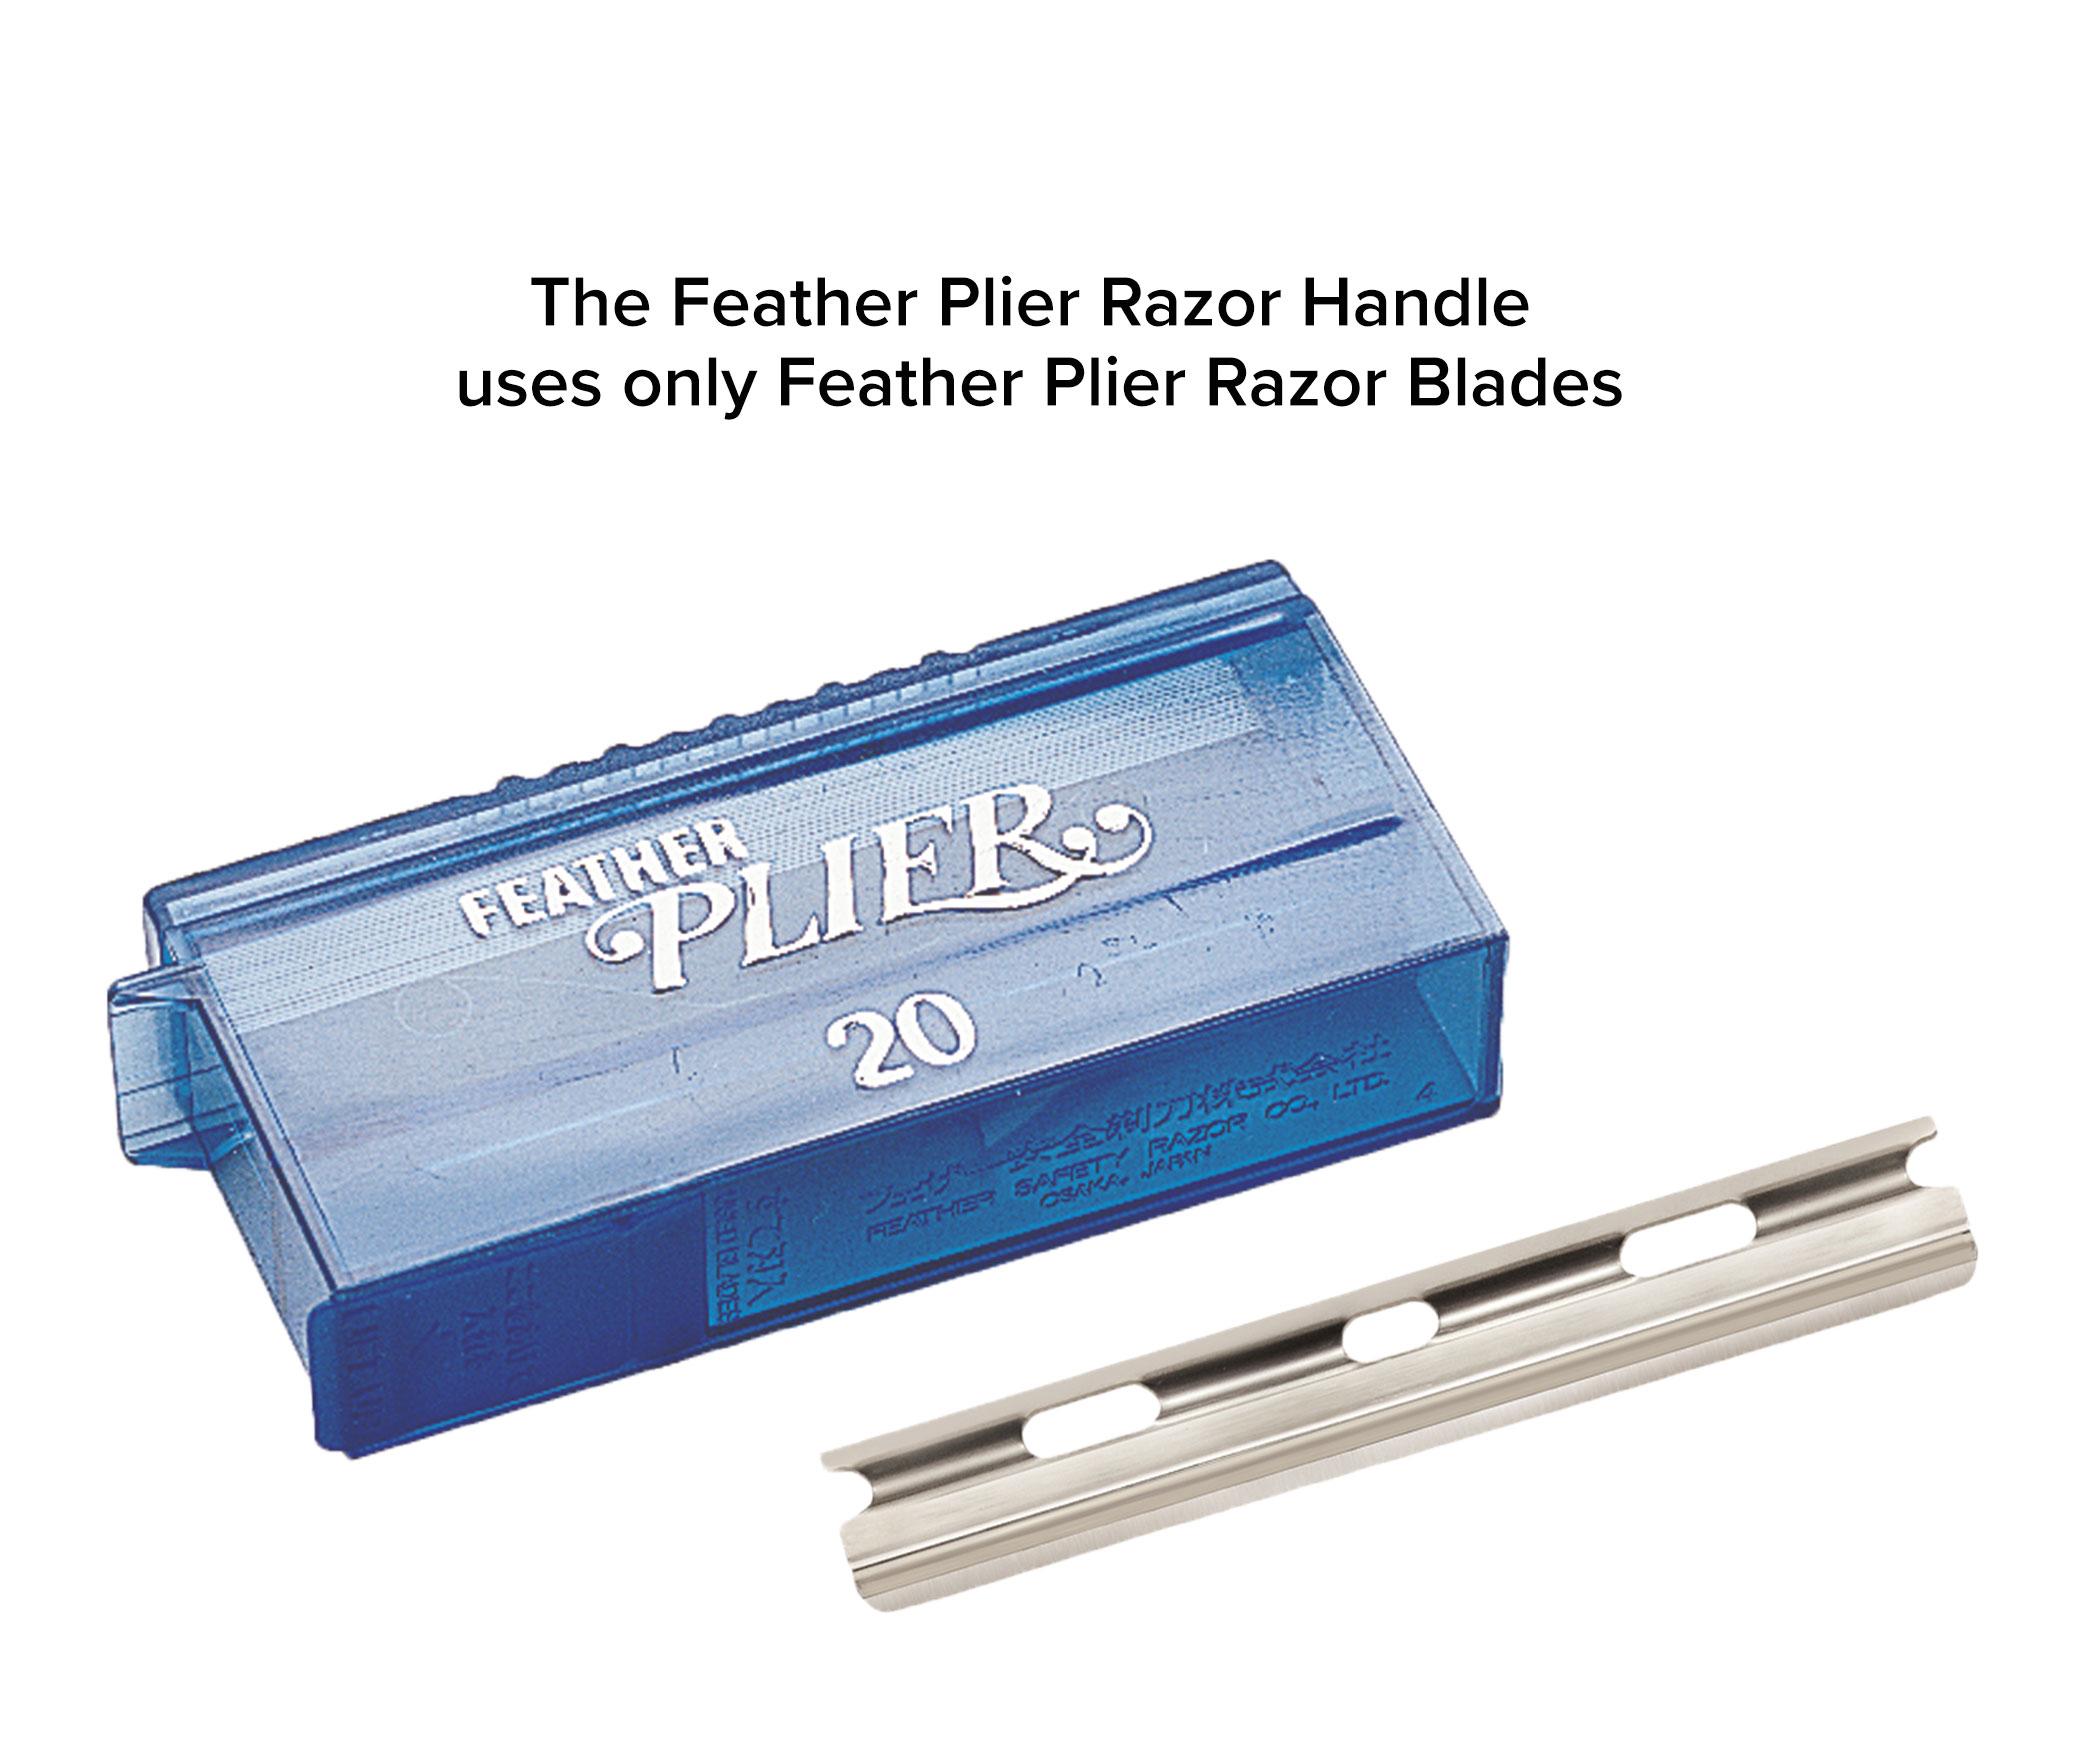 For use with Feather Plier Blades